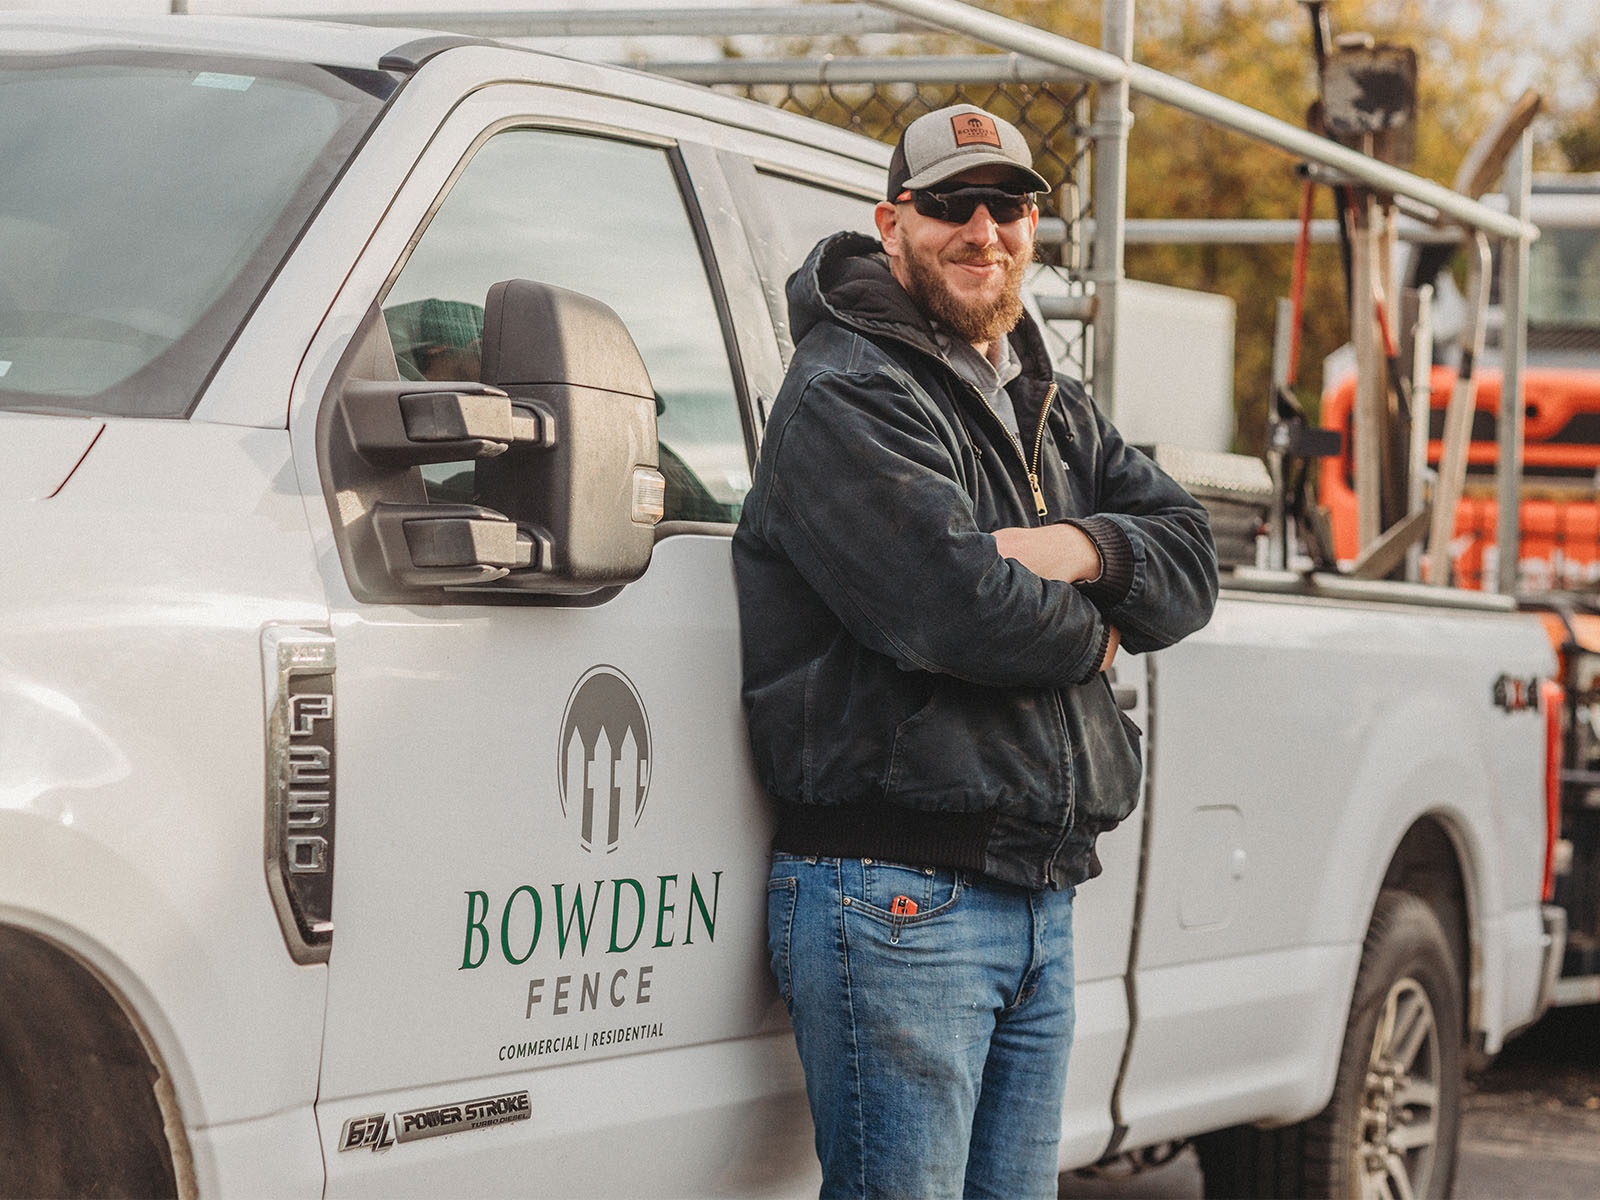 Bowden Fence foreman in Columbus Ohio